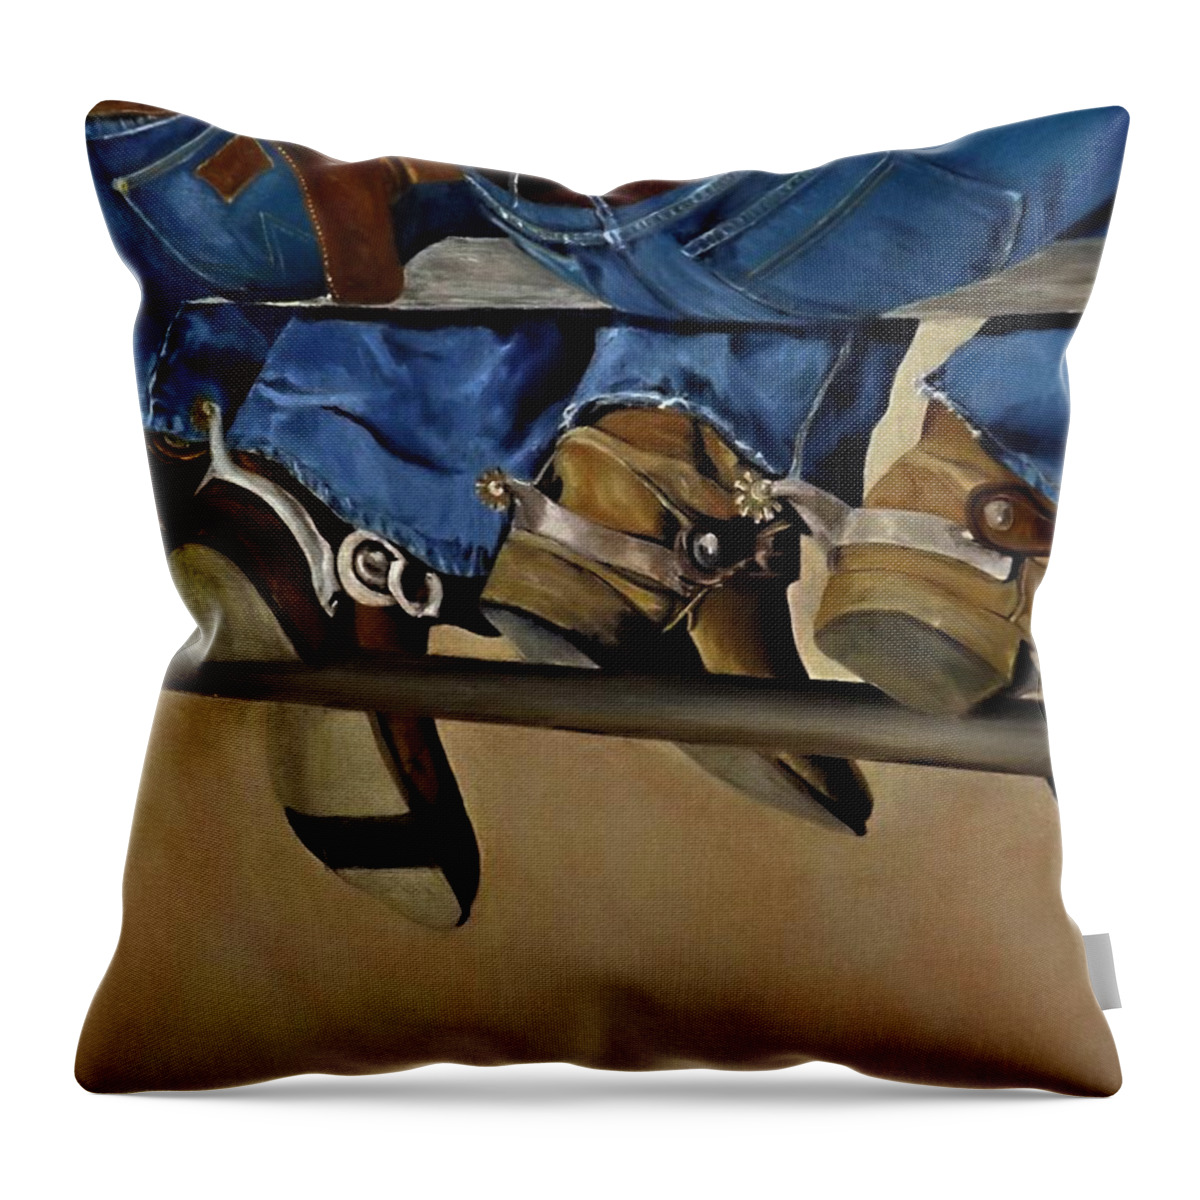 Cowboy Boots Throw Pillow featuring the painting Barfly Boots by Barry BLAKE